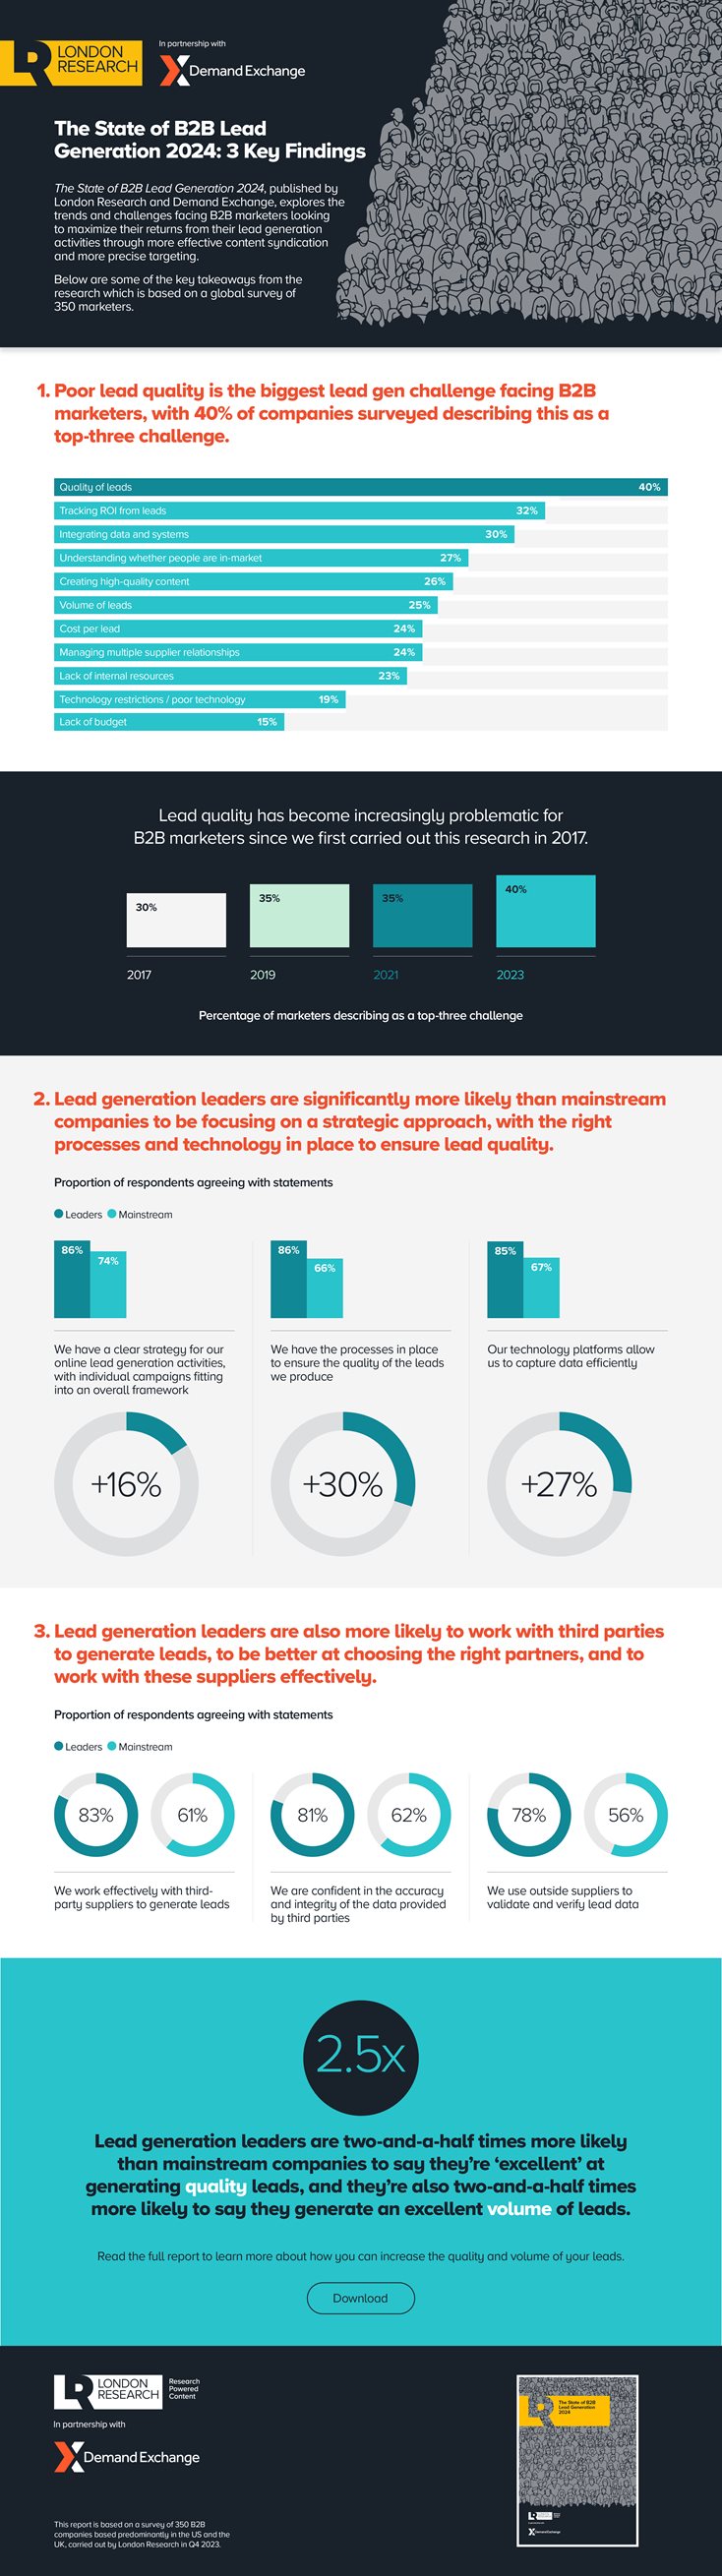 Demand-Exchange-infographic-State-of-Lead-Generation-2024.jpg